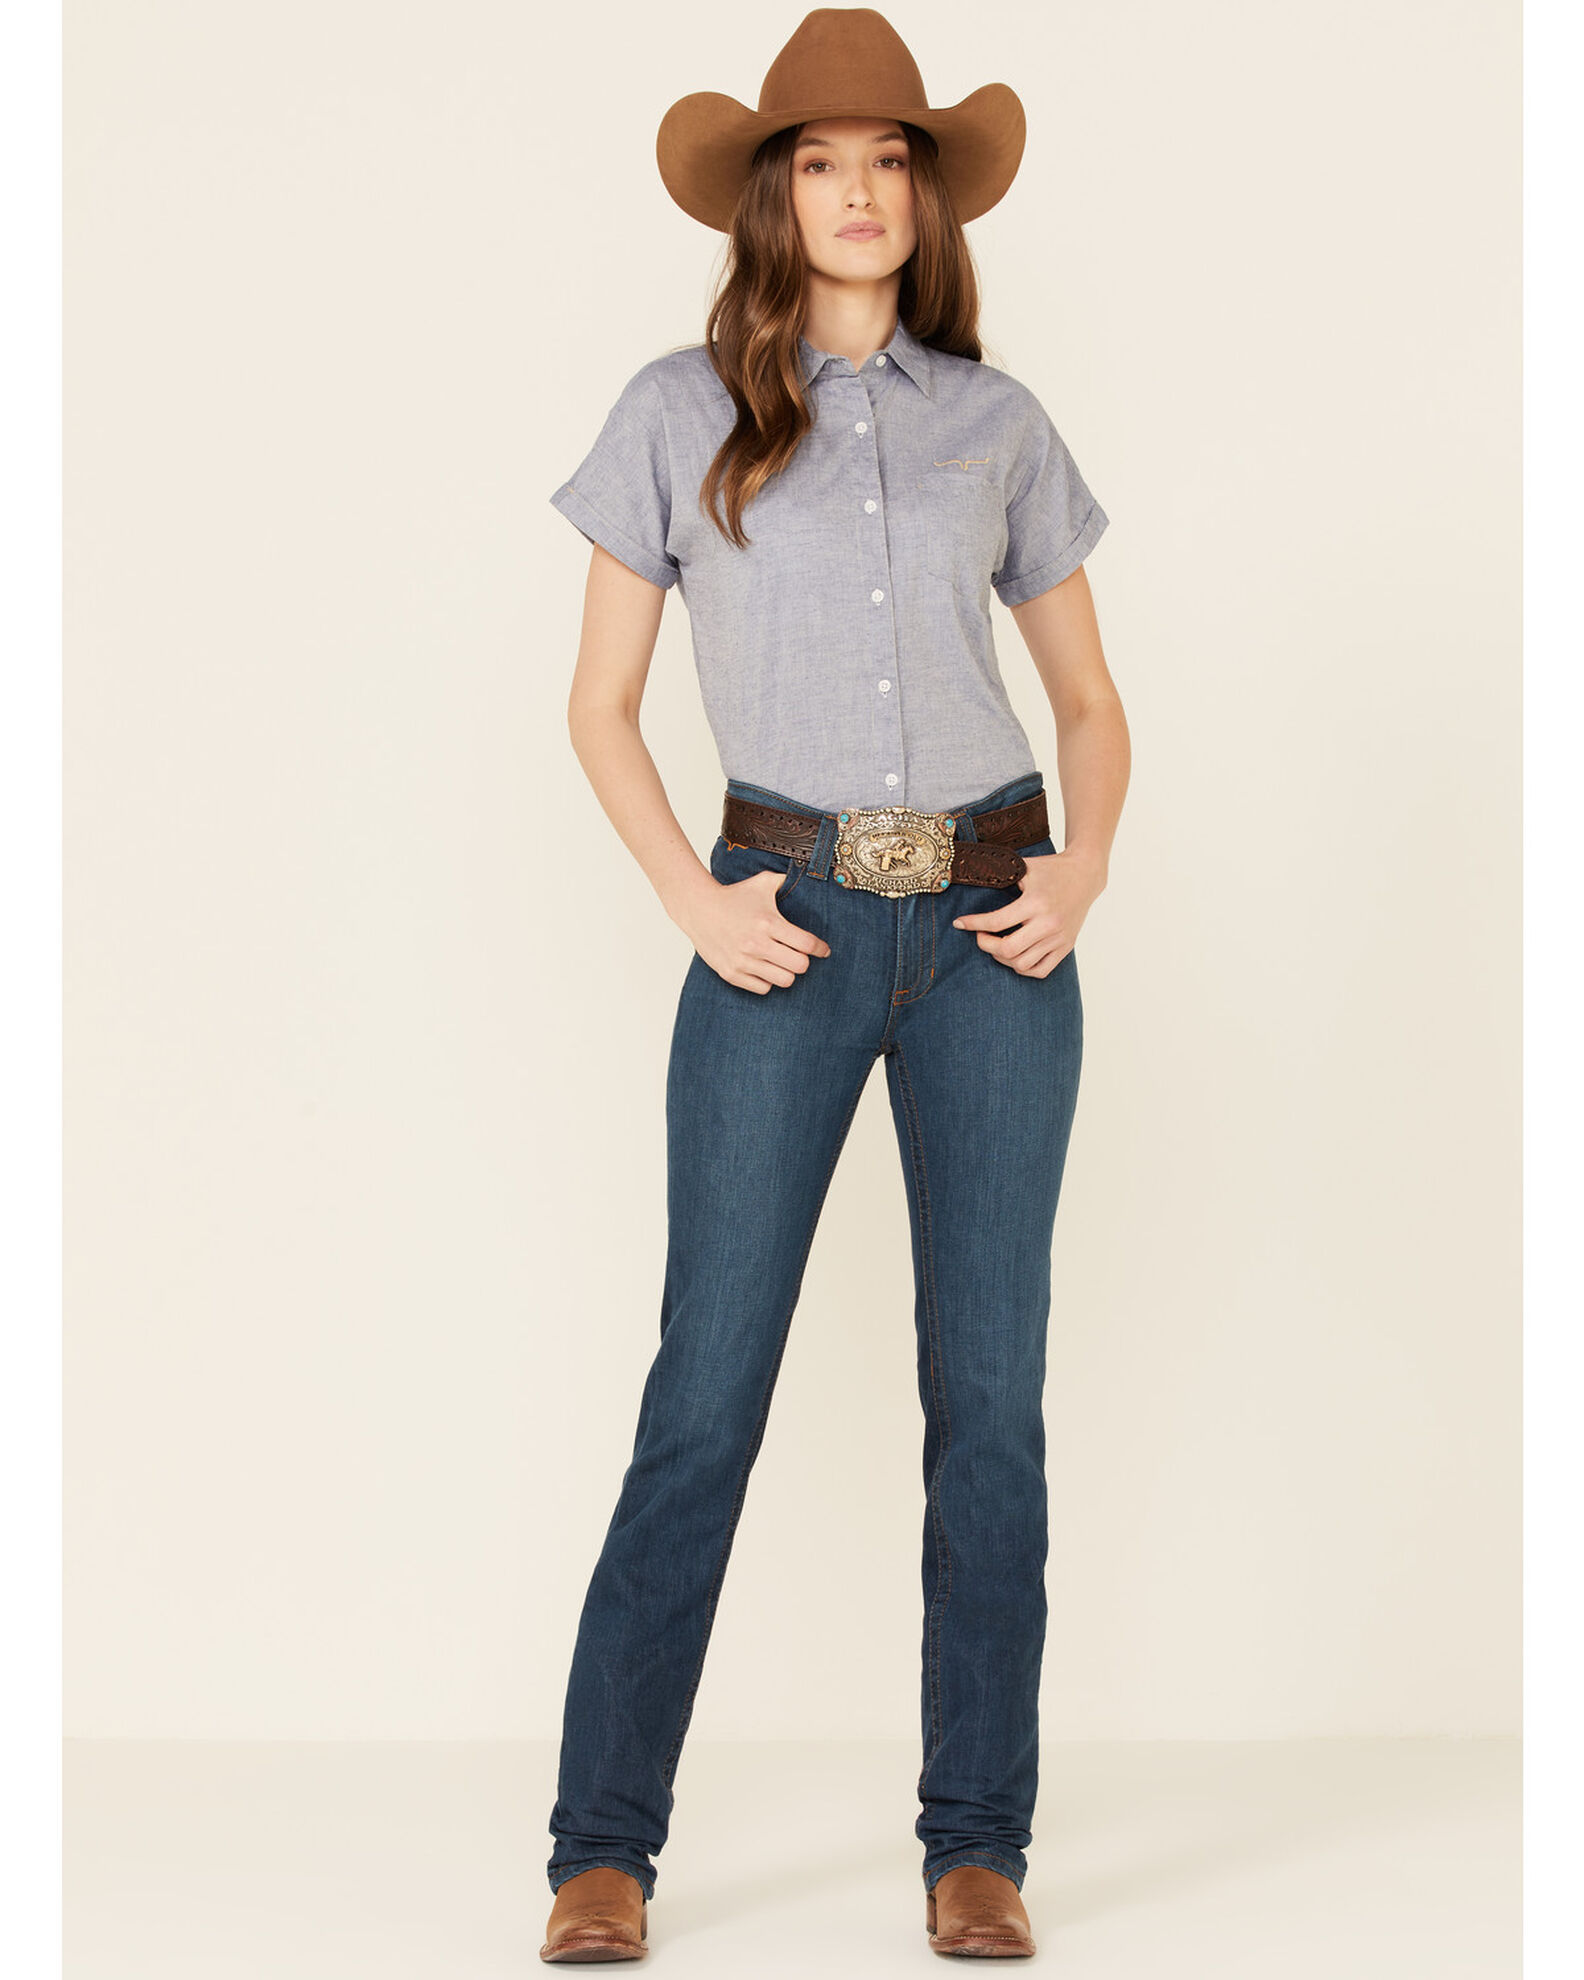 Women's Bootcut Jeans - Country Outfitter